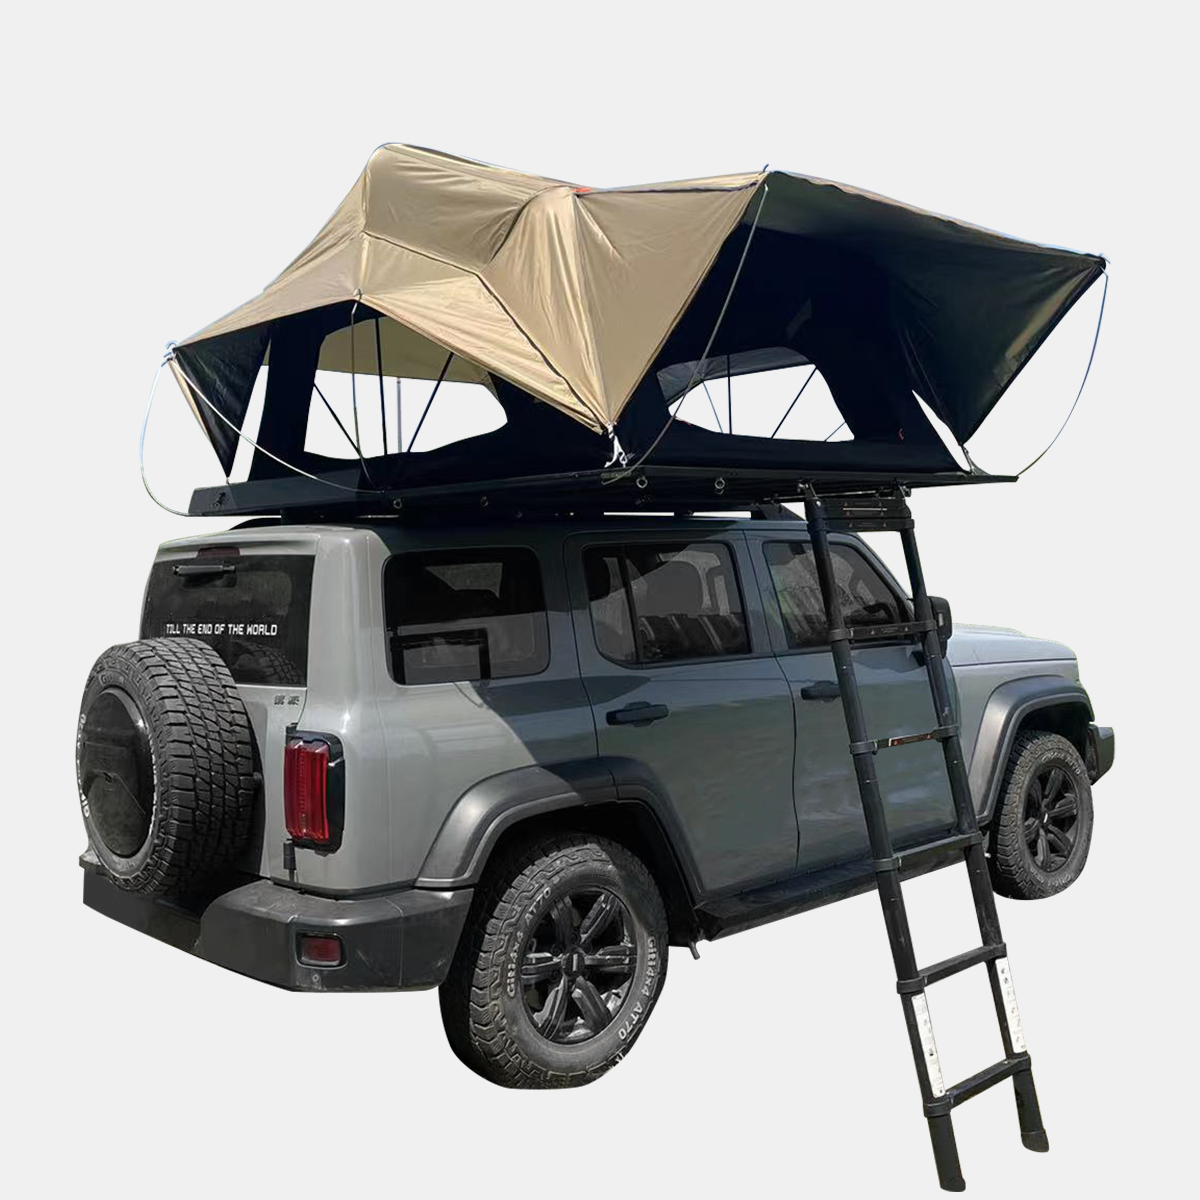 Union Jack Camping - Penthouse Maxi Hard Shell Roof Tent Vehicle RoofTent